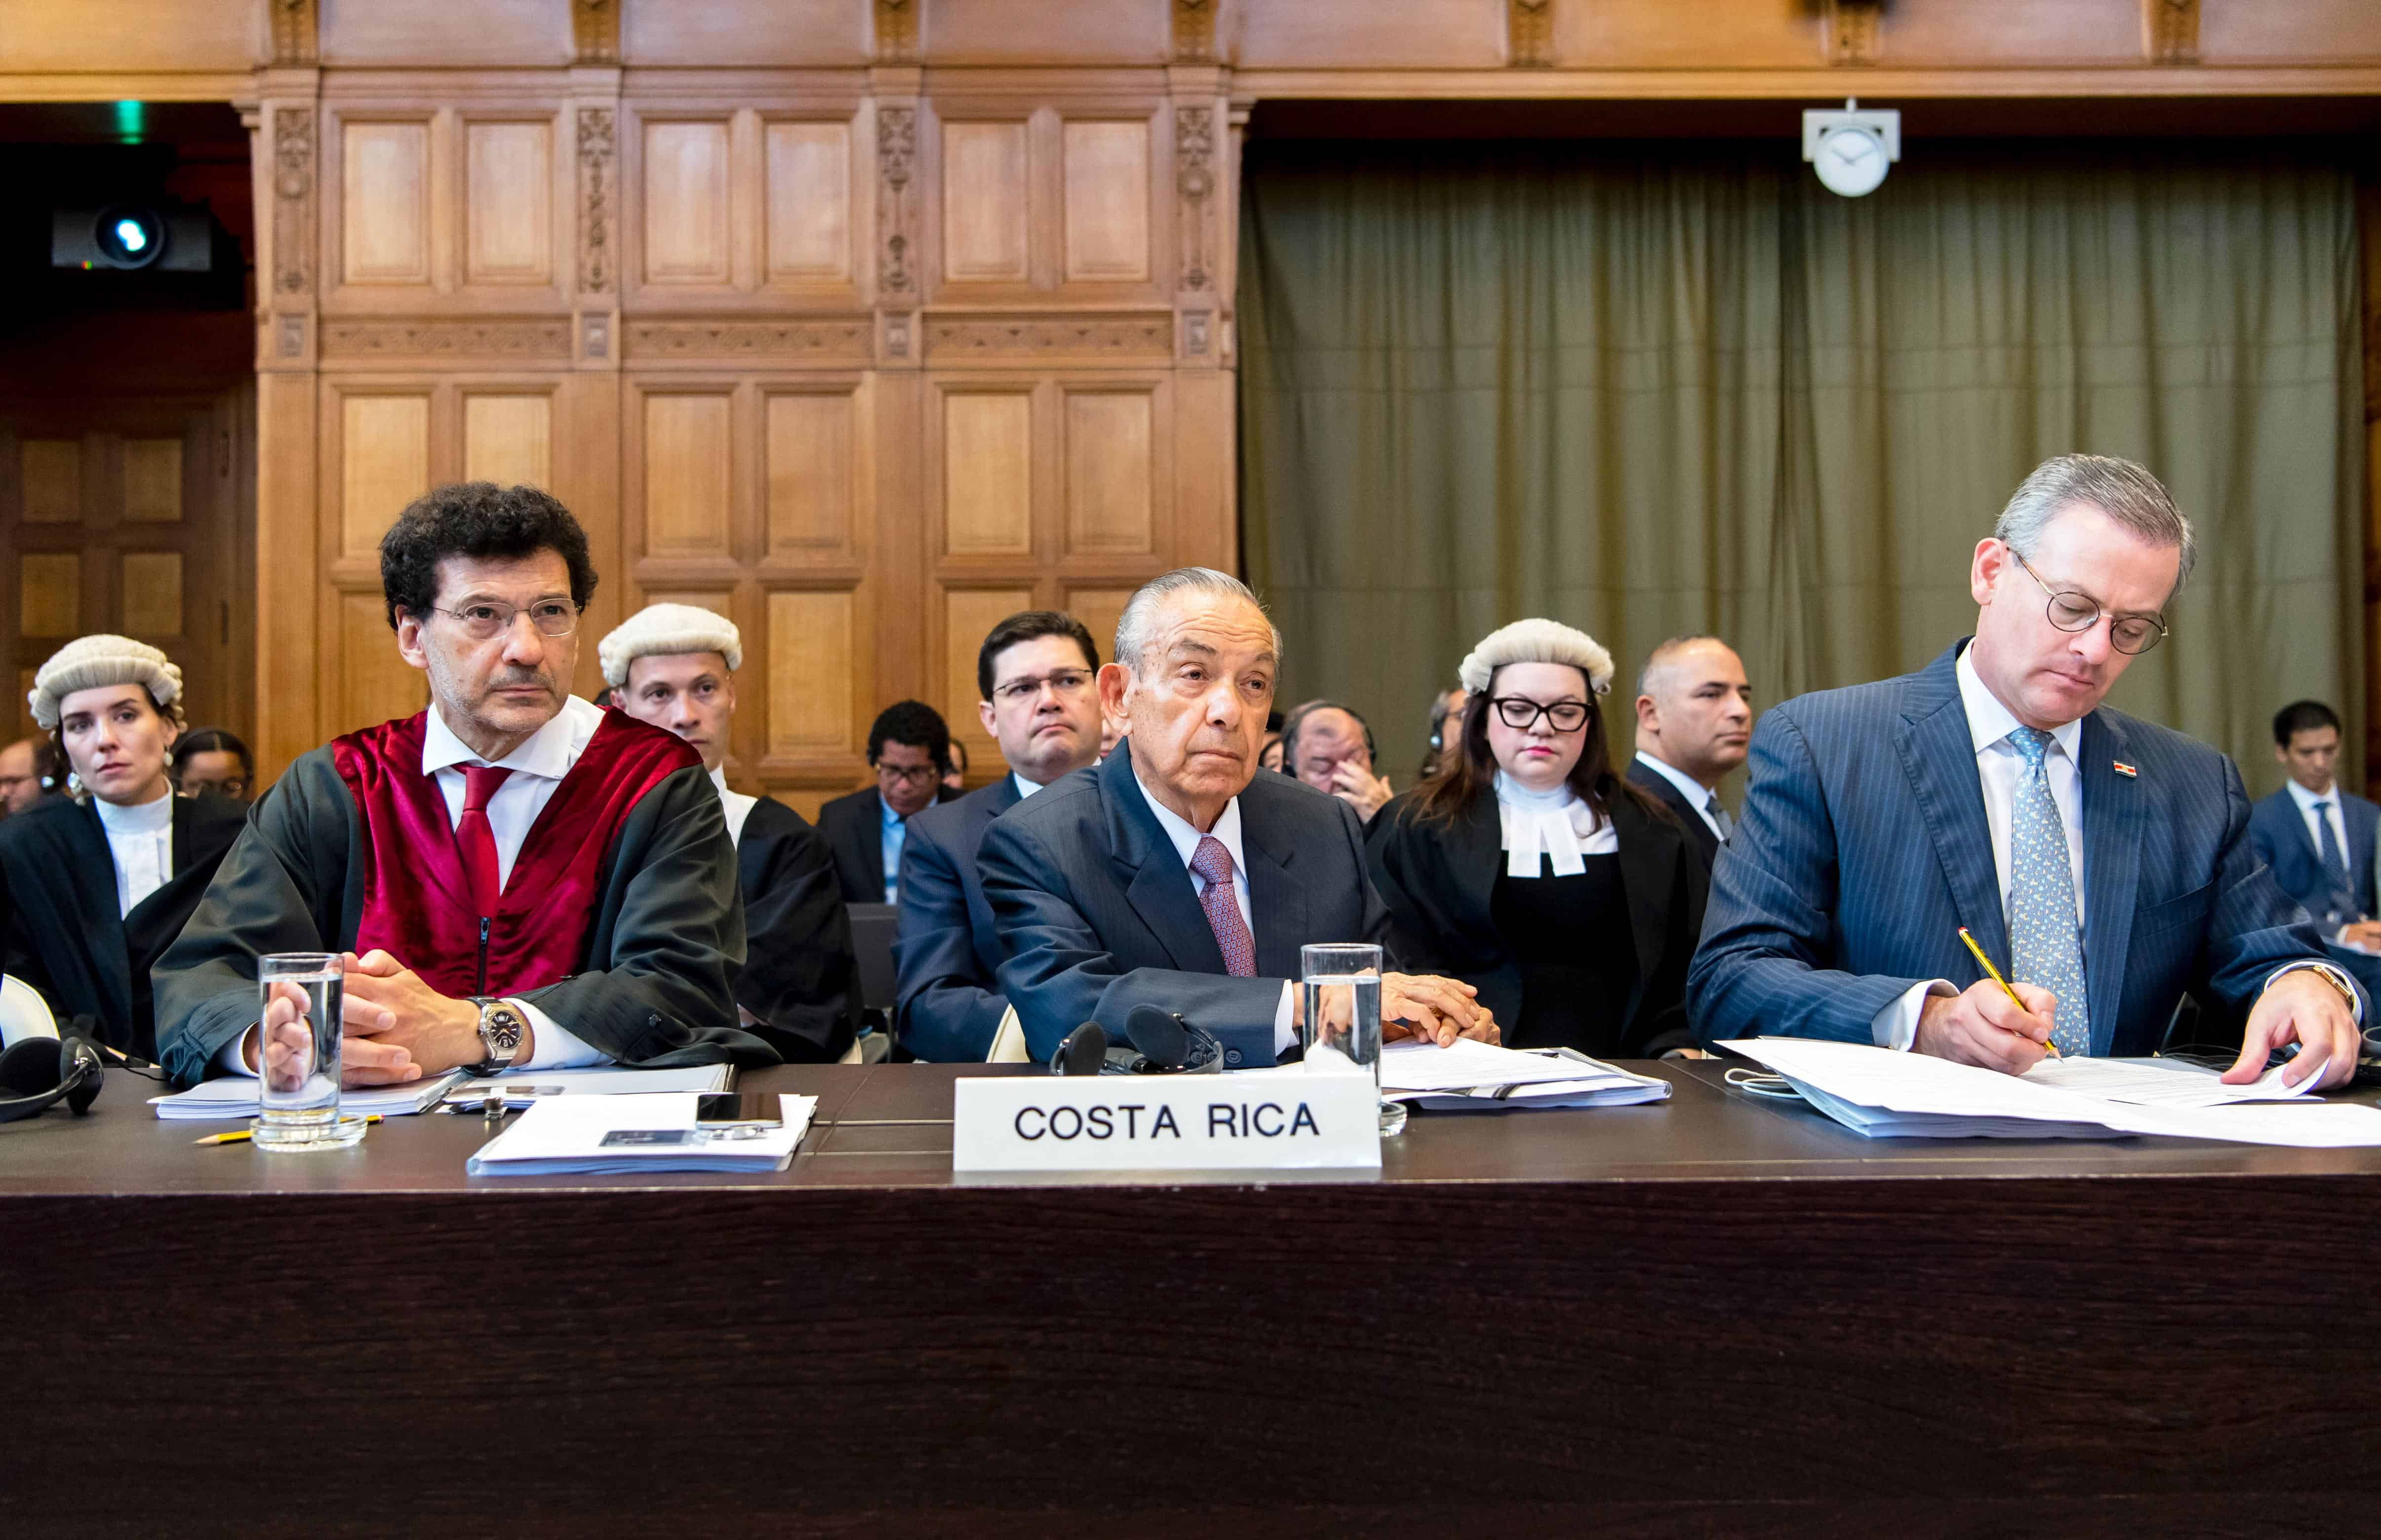 Costa Rica's legal team before the ICJ in border dispute. The Hague, Netherlands. June 3, 2017.